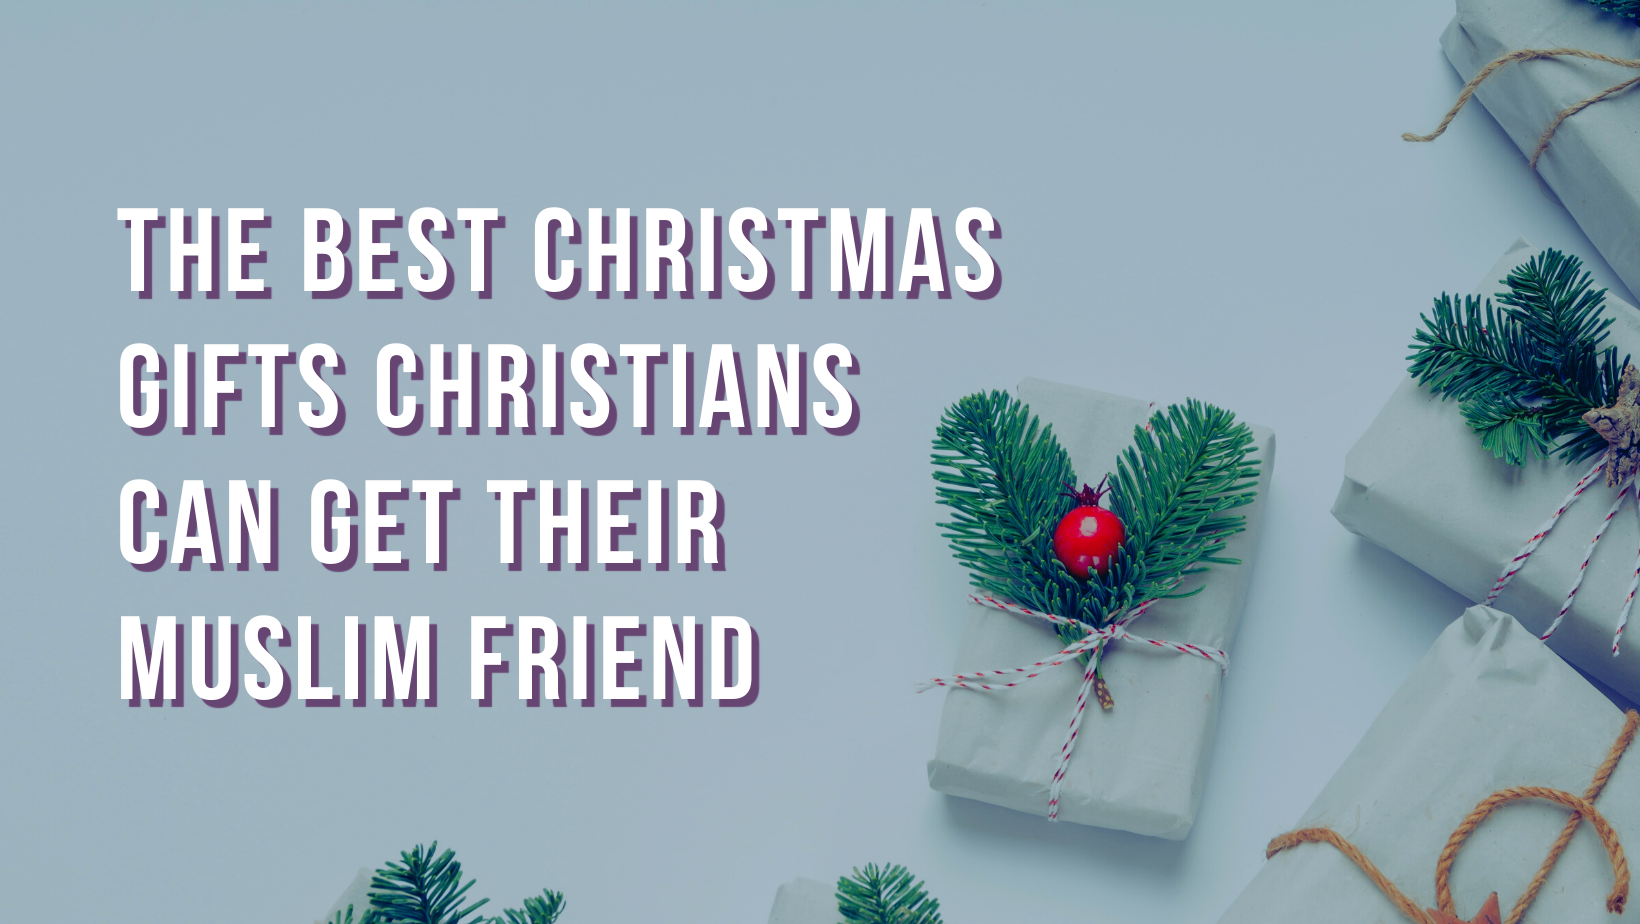 The best Christmas gifts Christians can get their Muslim friend